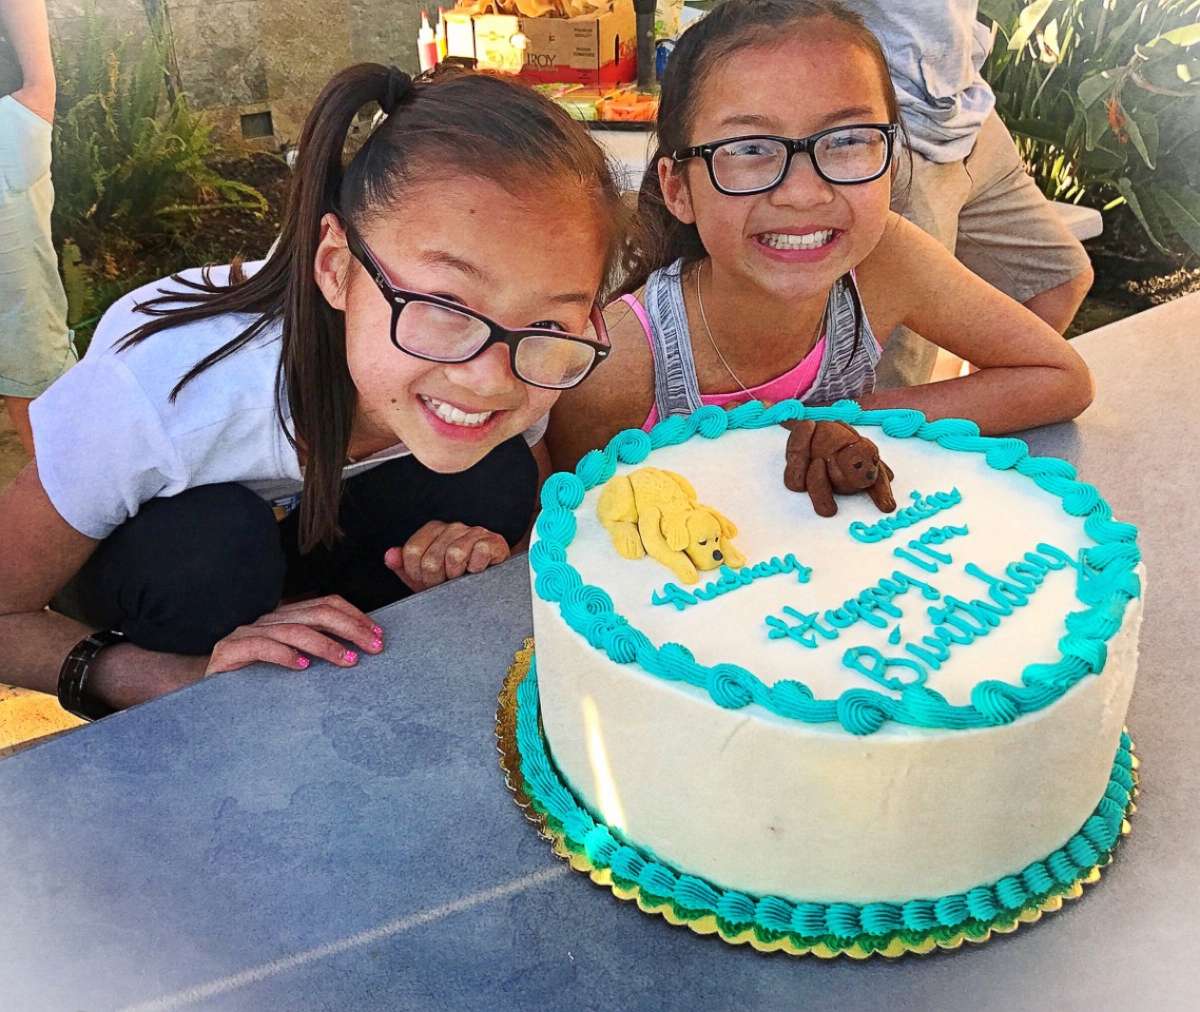 PHOTO:  In April, twin sister Audrey Doering and Gracie Rainsberry, who were separated at birth and reunited, celebrated their 11th birthday together.